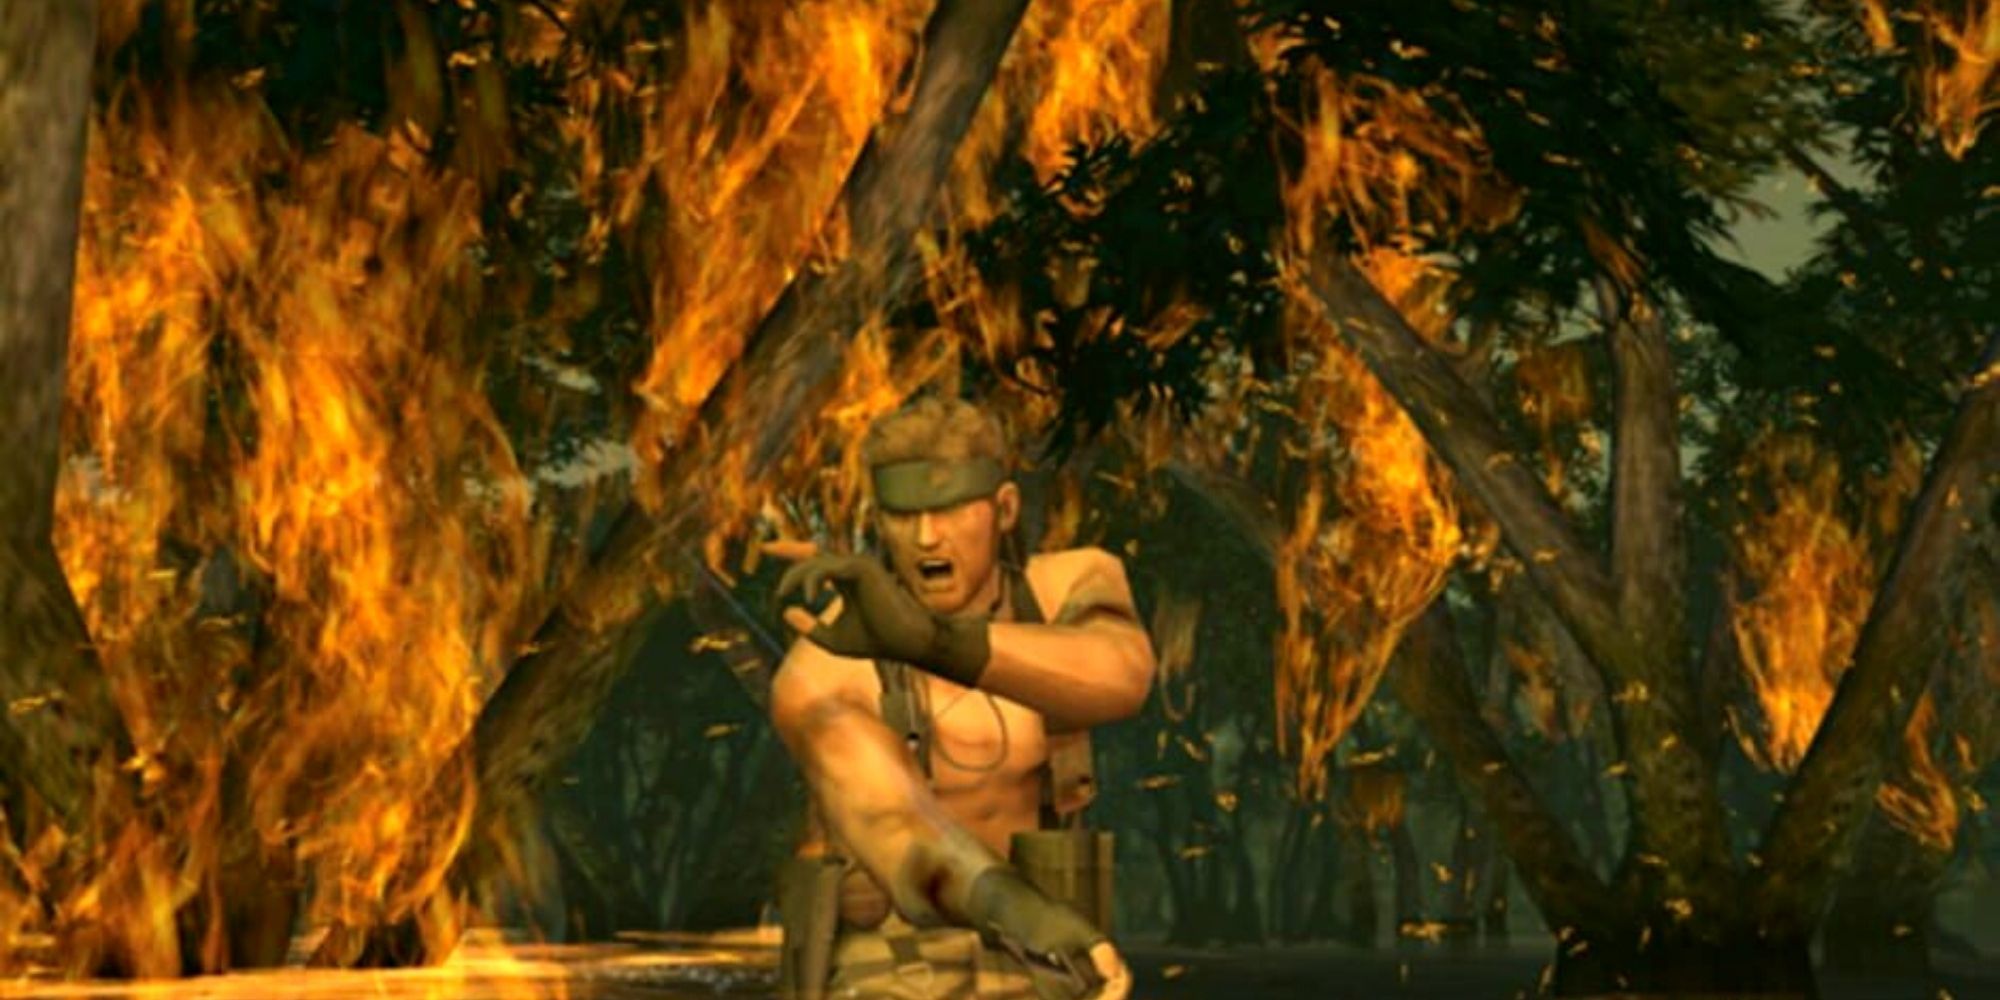 Naked Snake in a fighting stance in front of burning trees